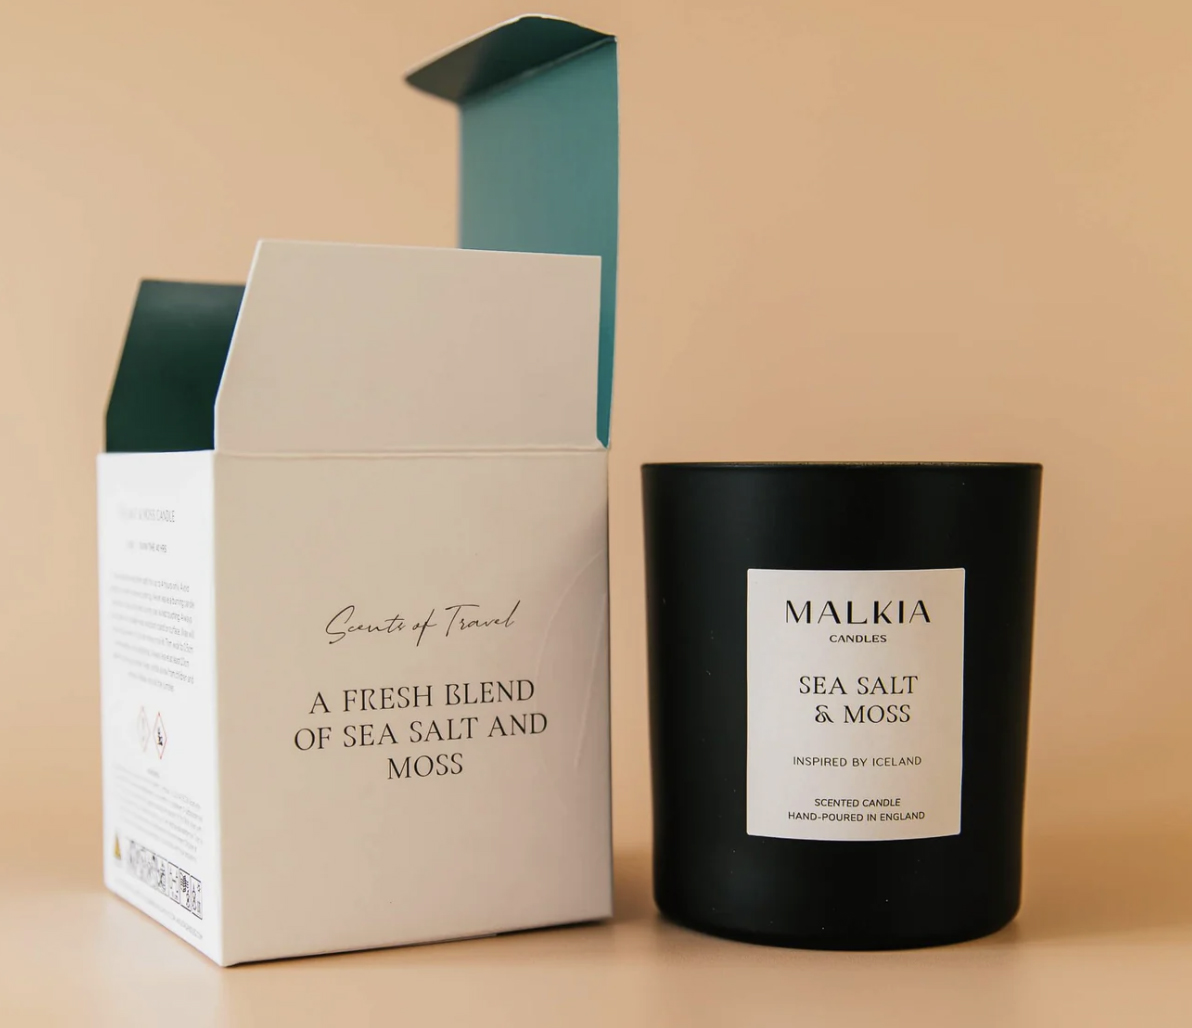 Malkia scented candles